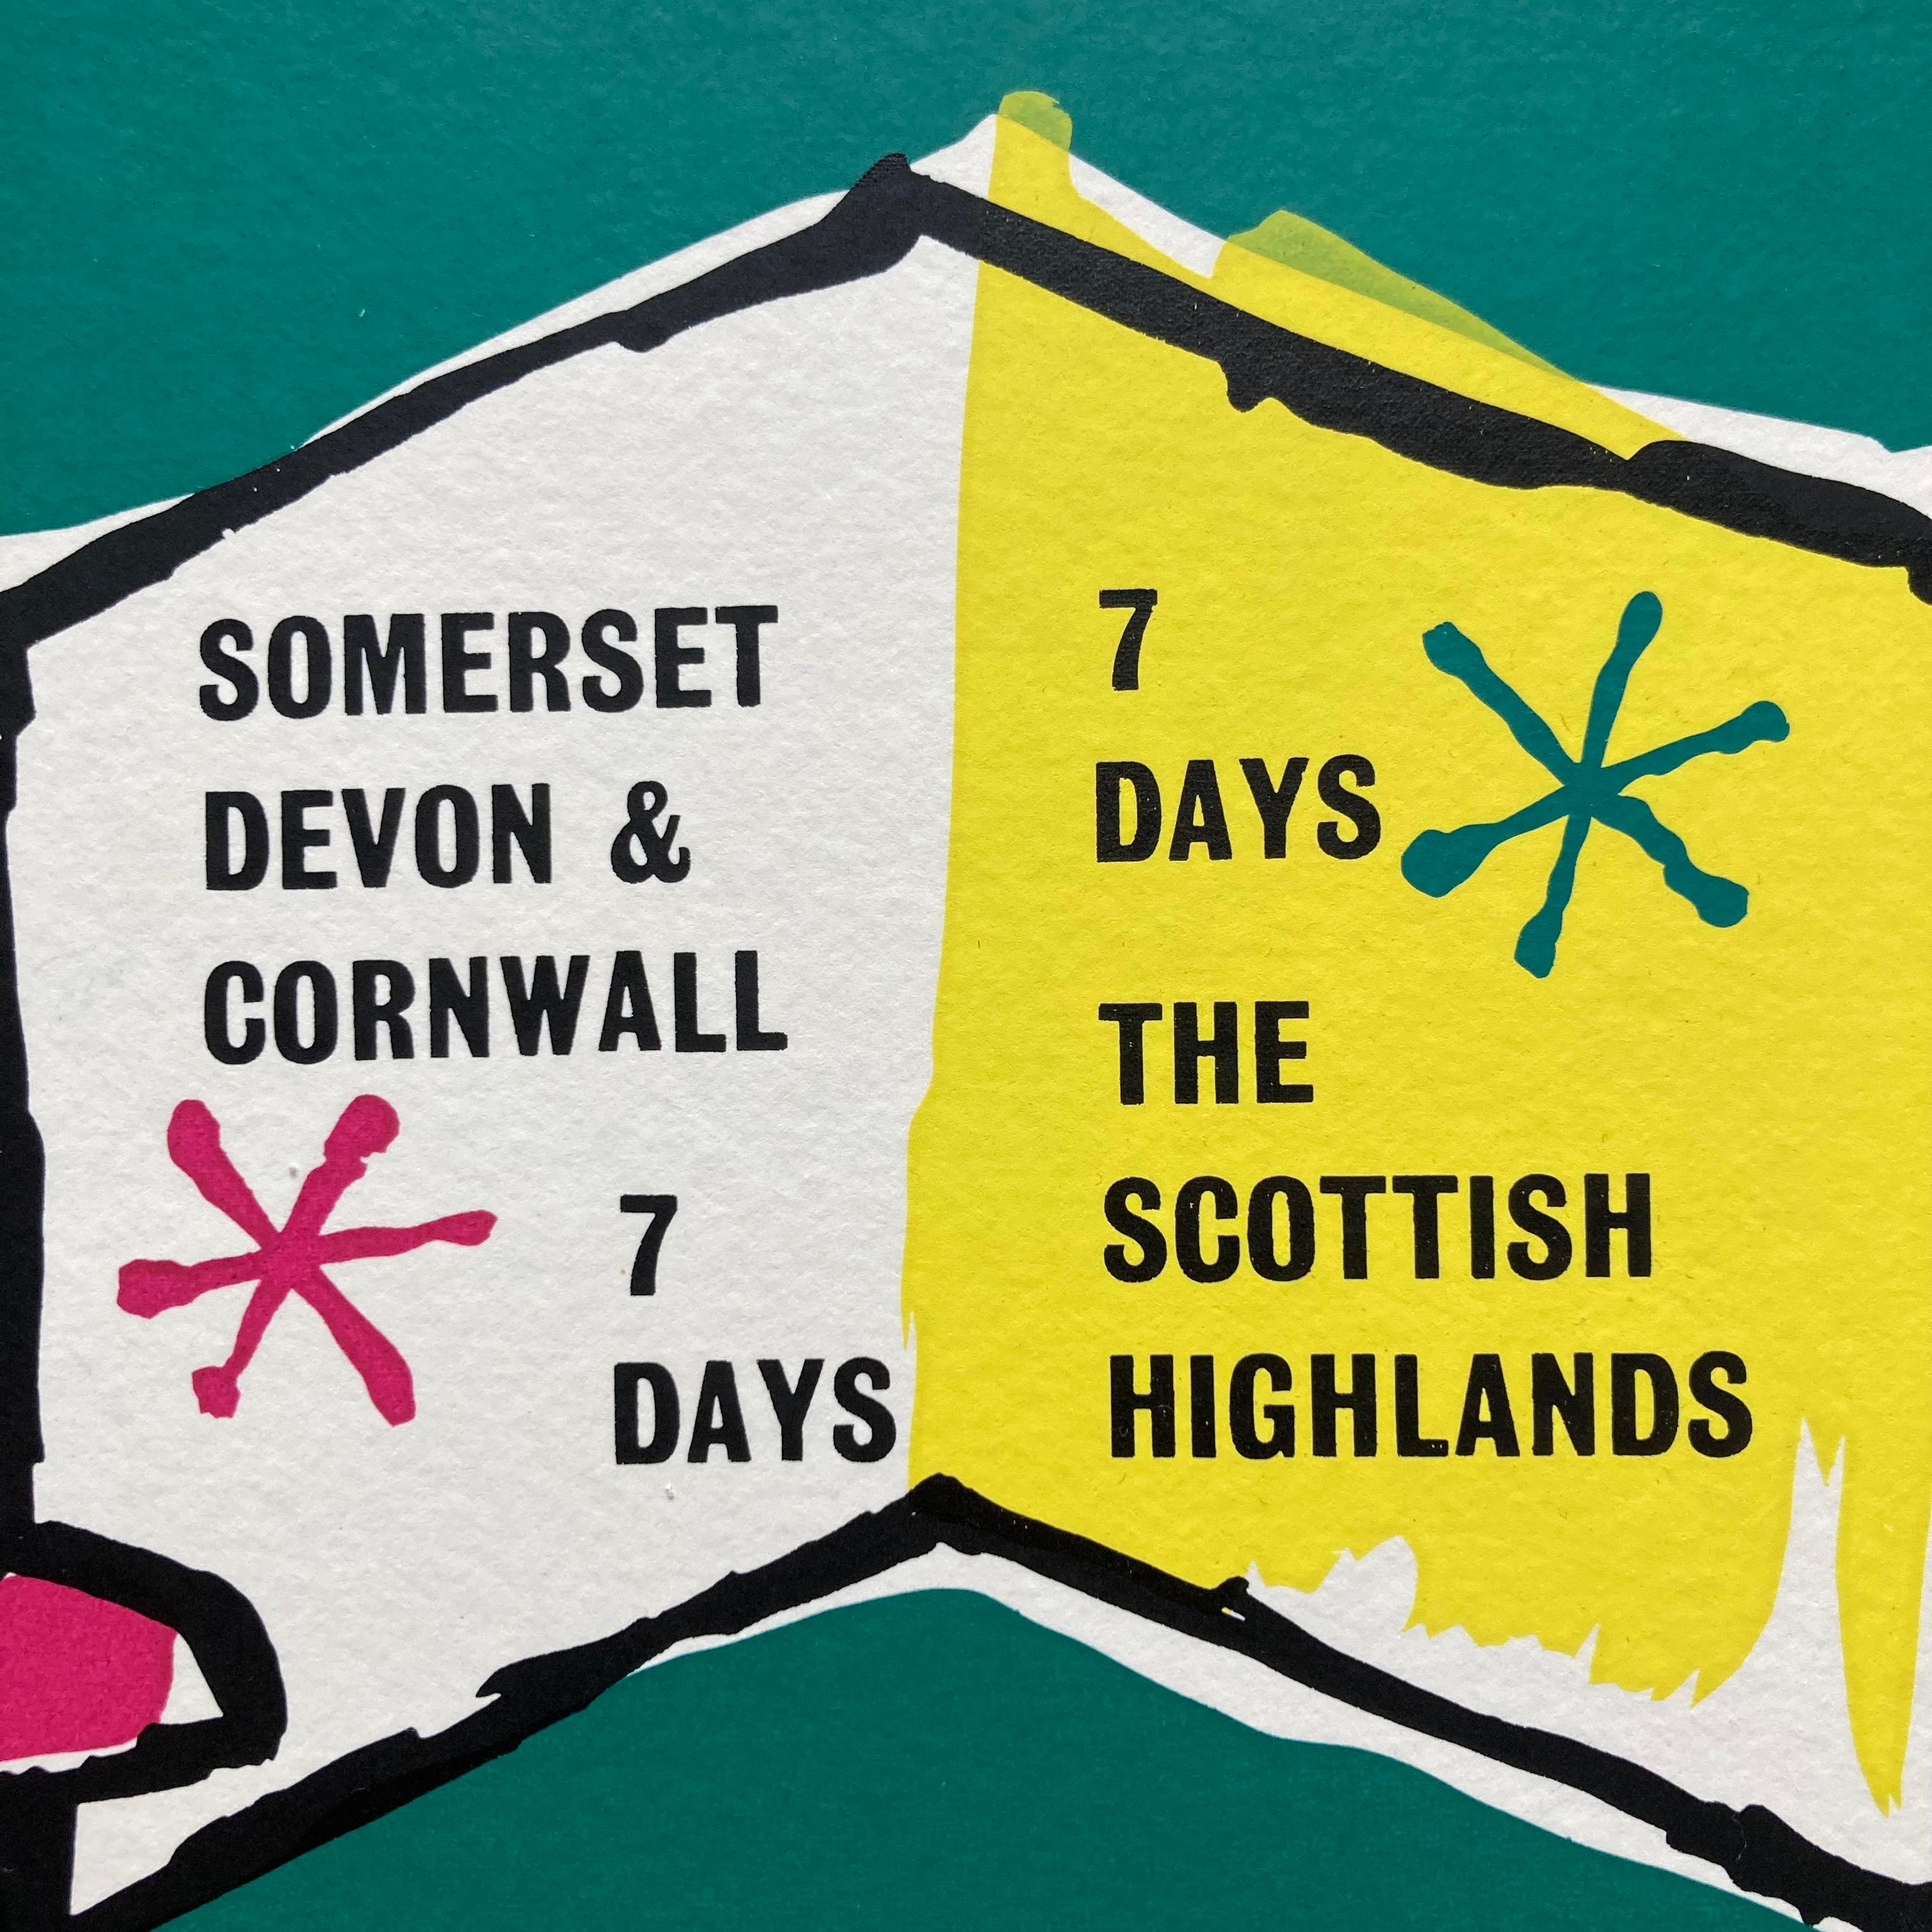 Coach firms had a captive market before the advent of mass car ownership and these charming panel posters were an attractive advertising tool. This 1960's poster is by Edward Clarke and is promoting coach holidays around Britain. It colourfully